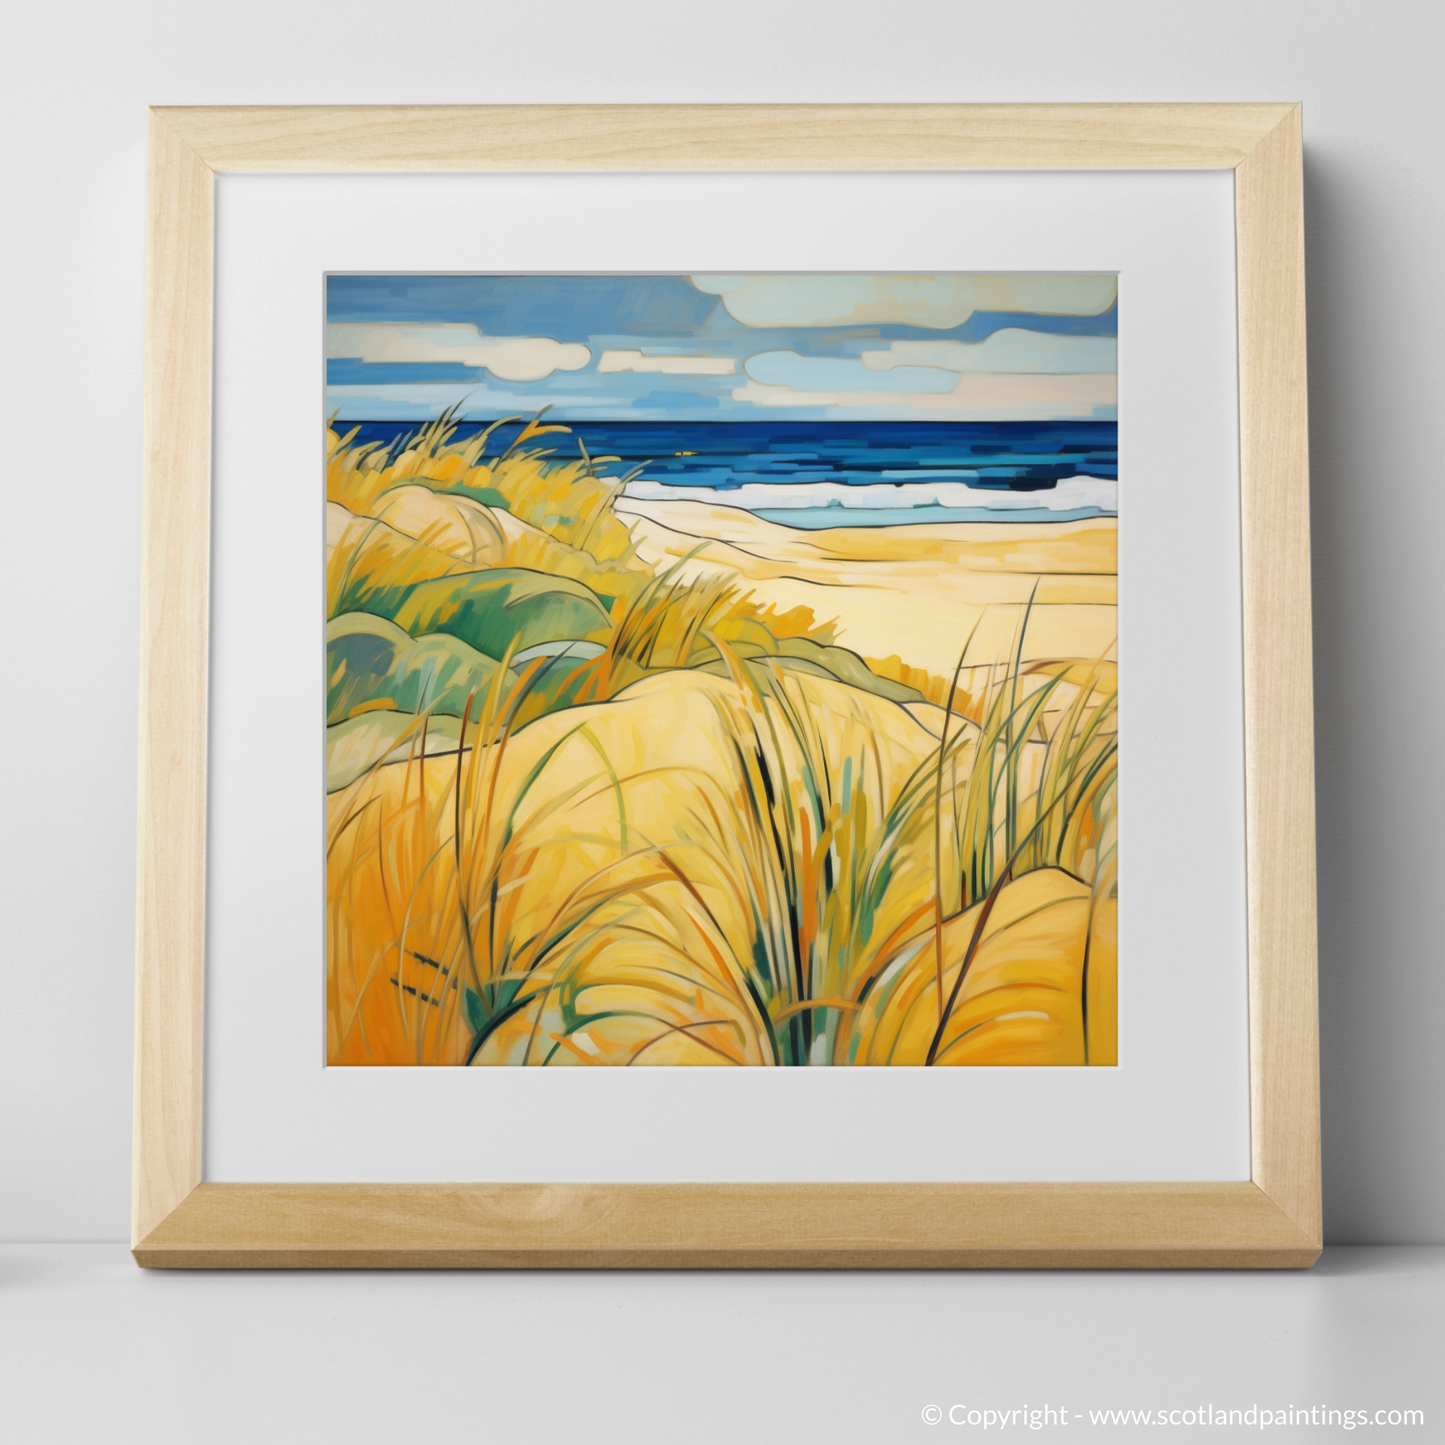 Cubist Ode to Lyme Grass at Nairn Beach